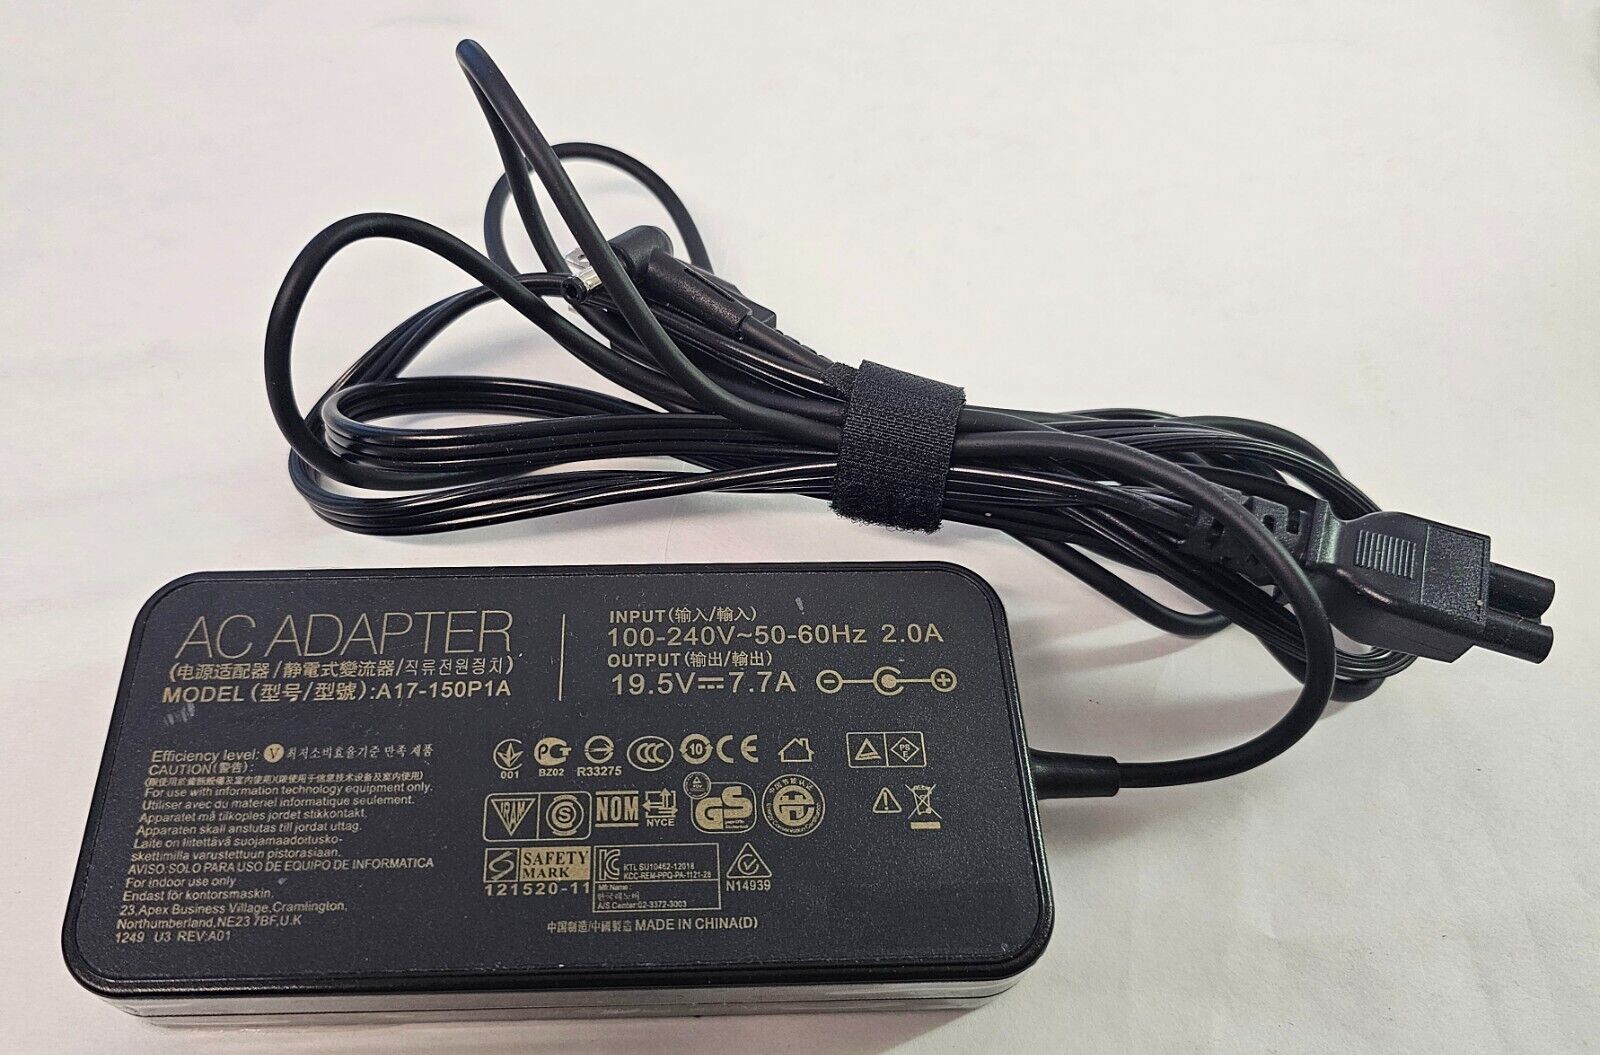 Genuine ASUS Laptop Power Adapter Charger A17-150P1A 19.5V 7.7A 150W